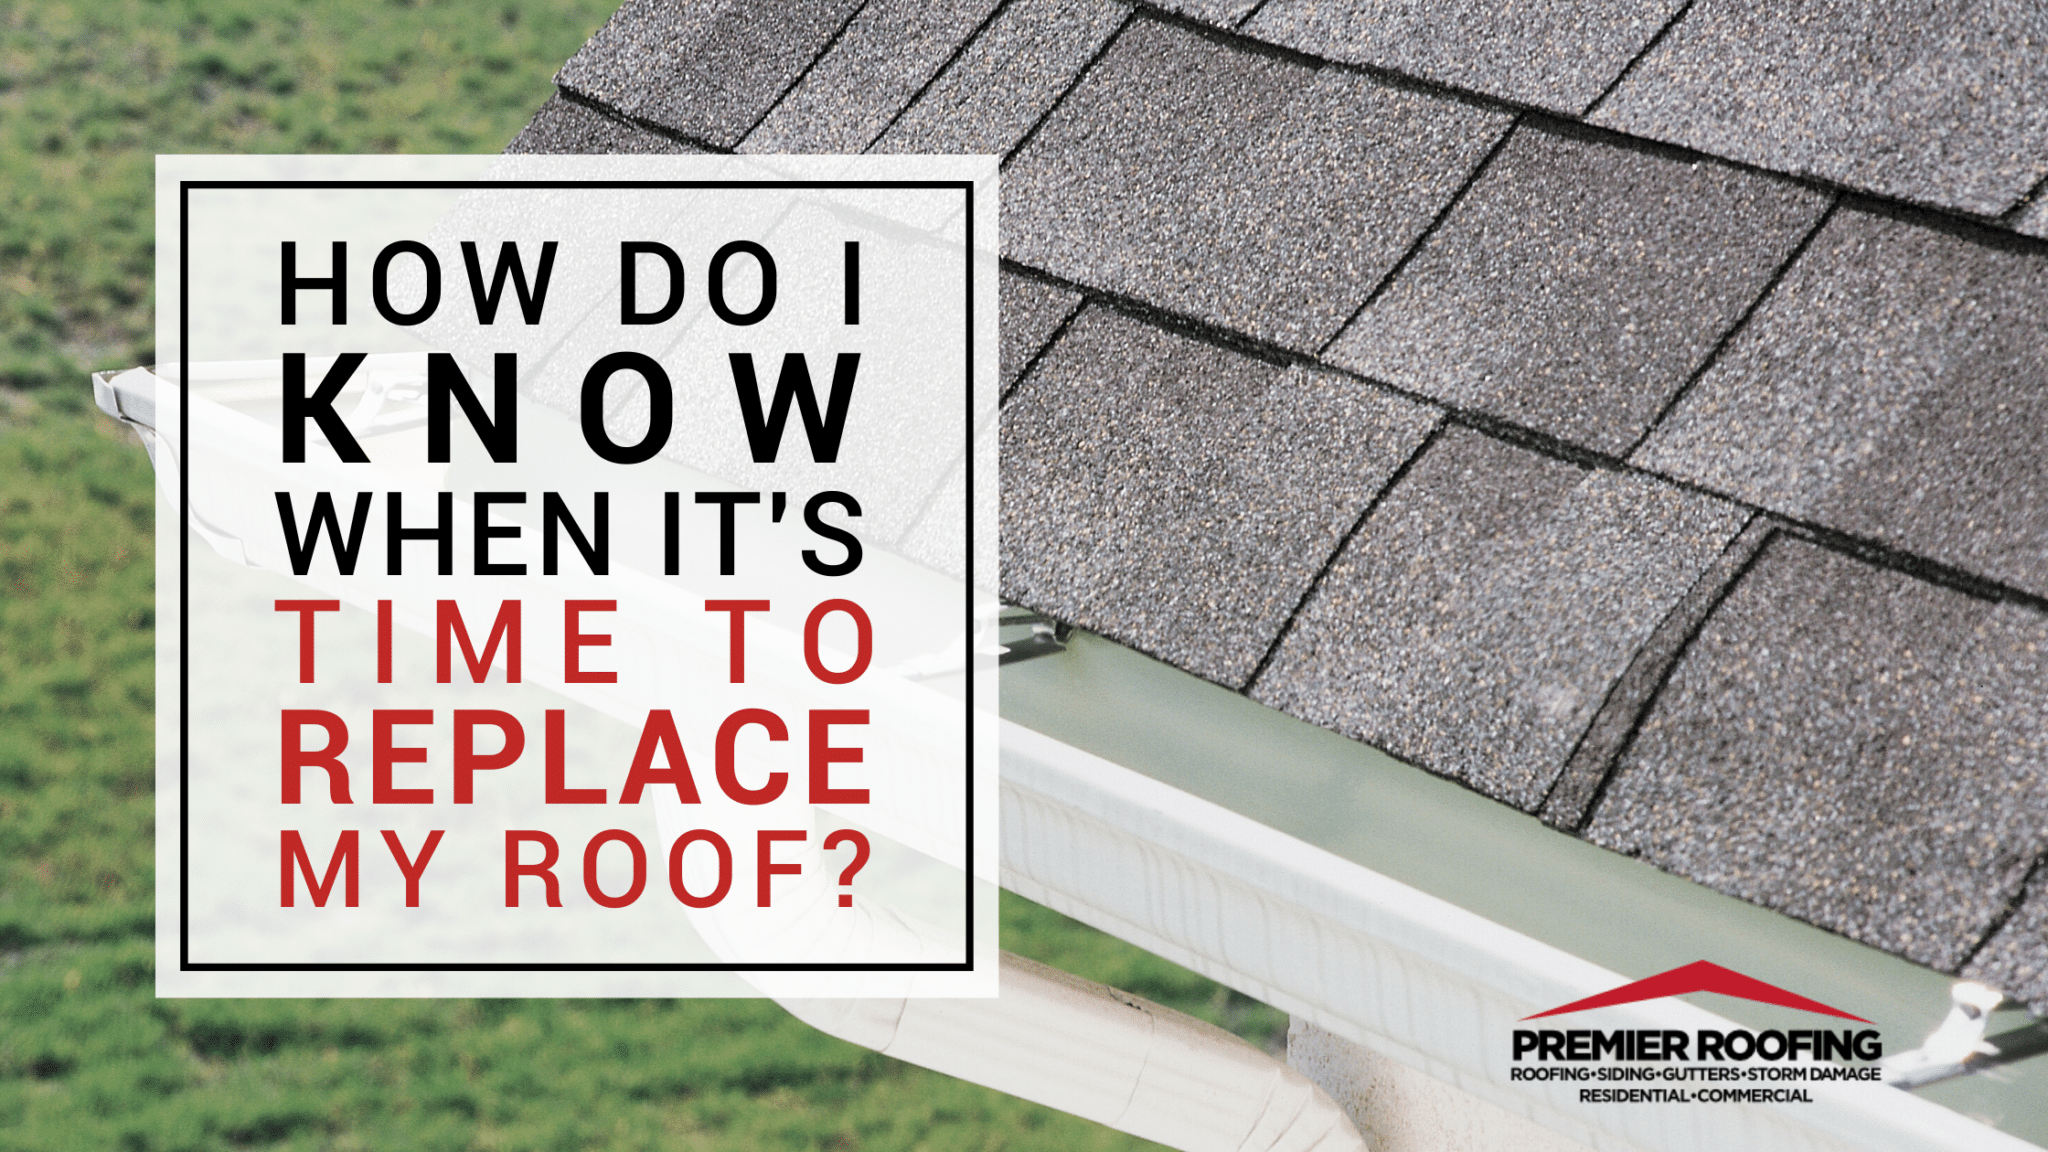 How do I know when it’s time to replace my roof?